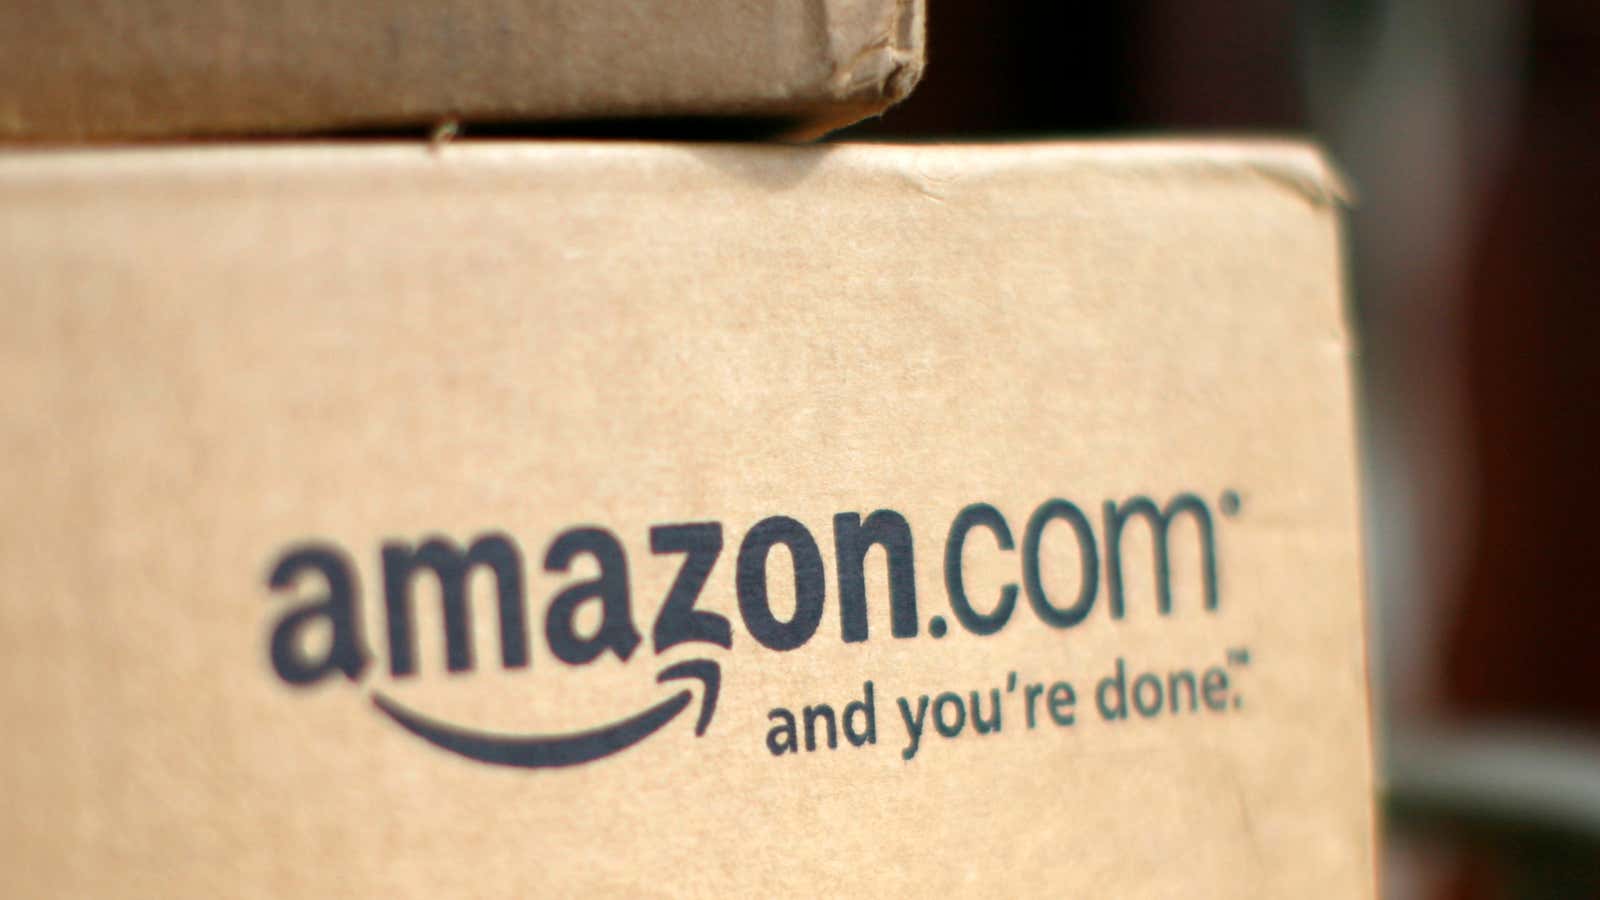 Amazon shipped off holiday gifts to 185 countries this season.